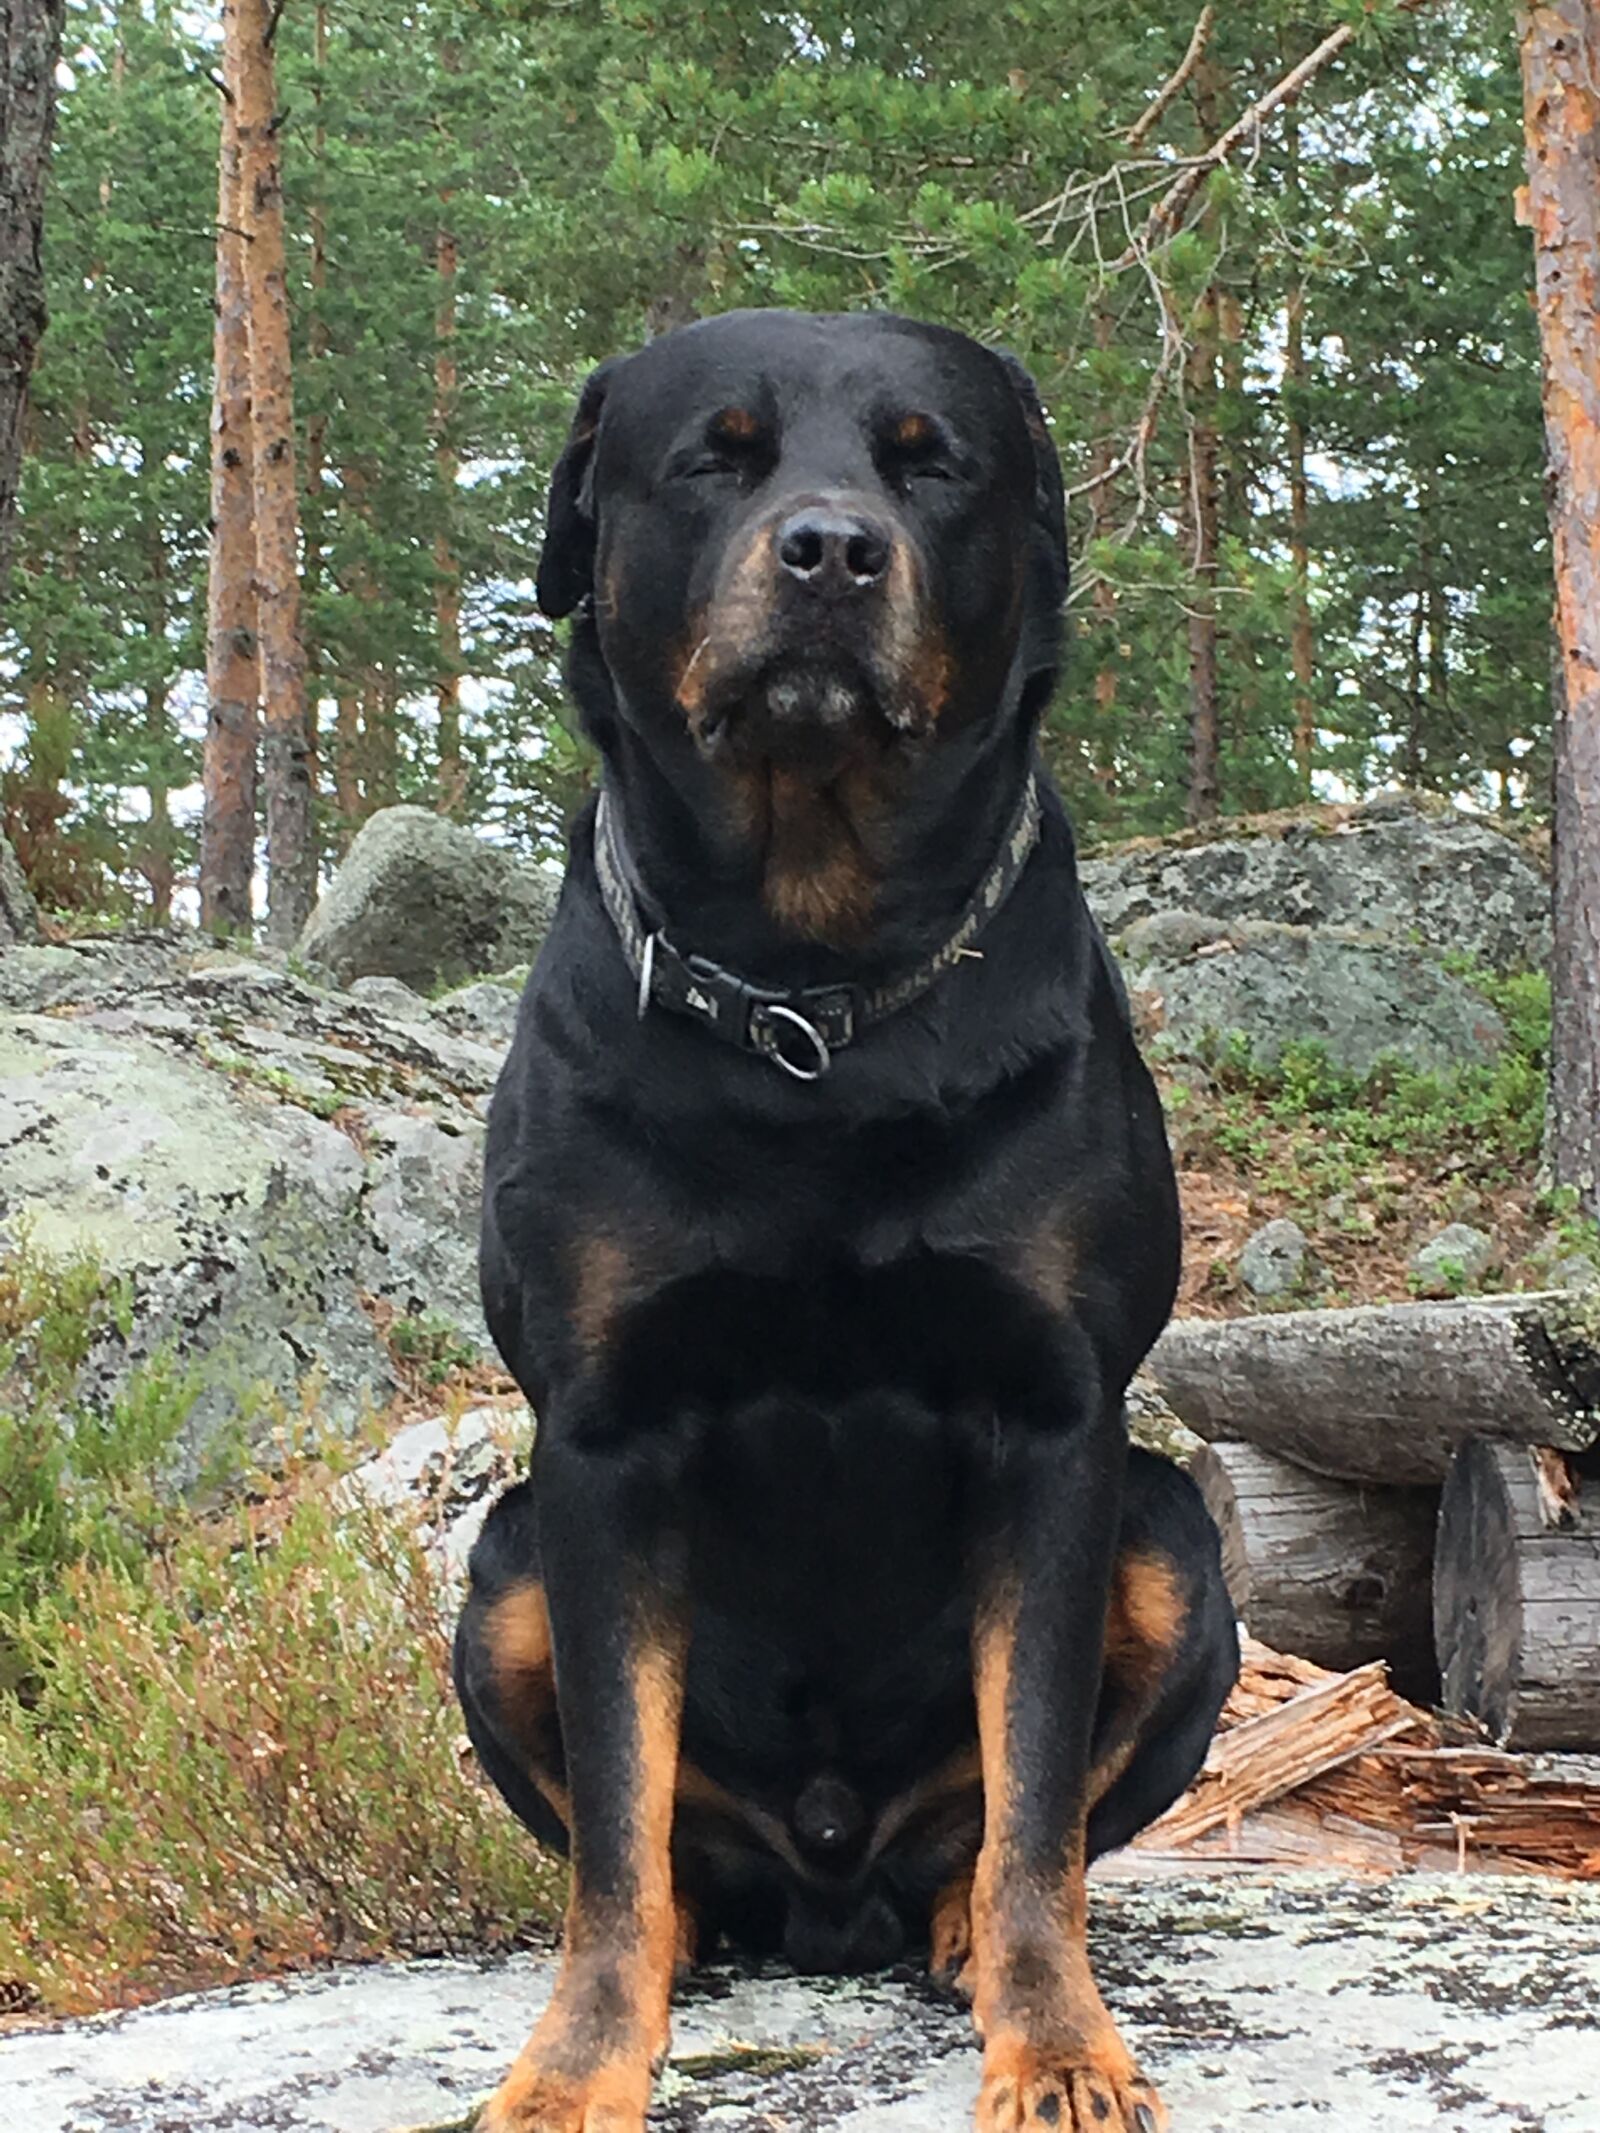 Apple iPhone 6s sample photo. Rottweiler, dog, forest photography